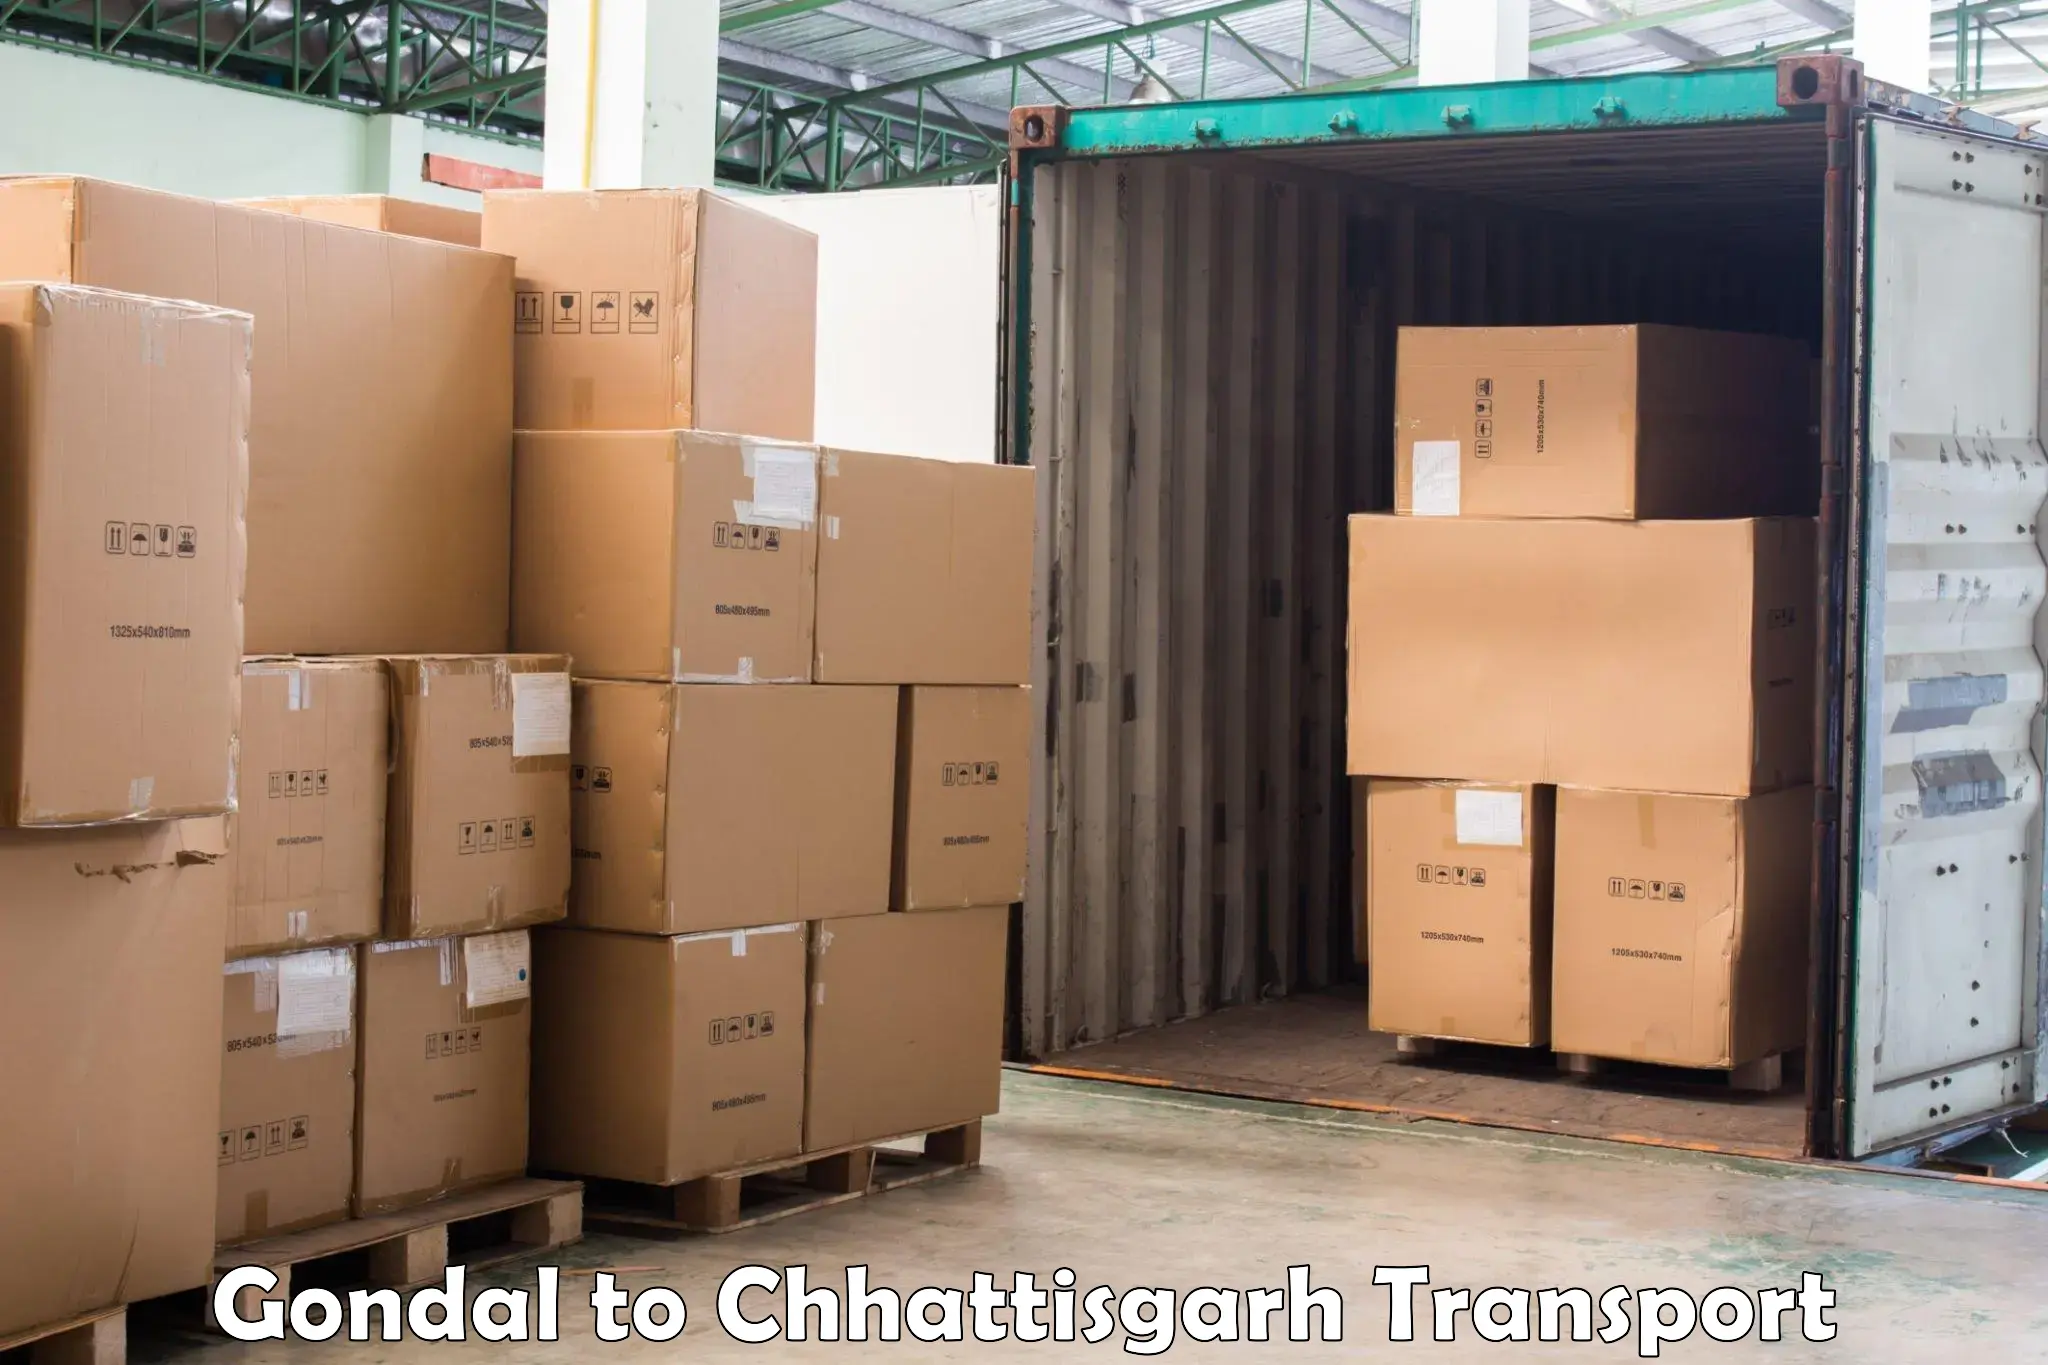 Lorry transport service Gondal to bagbahra